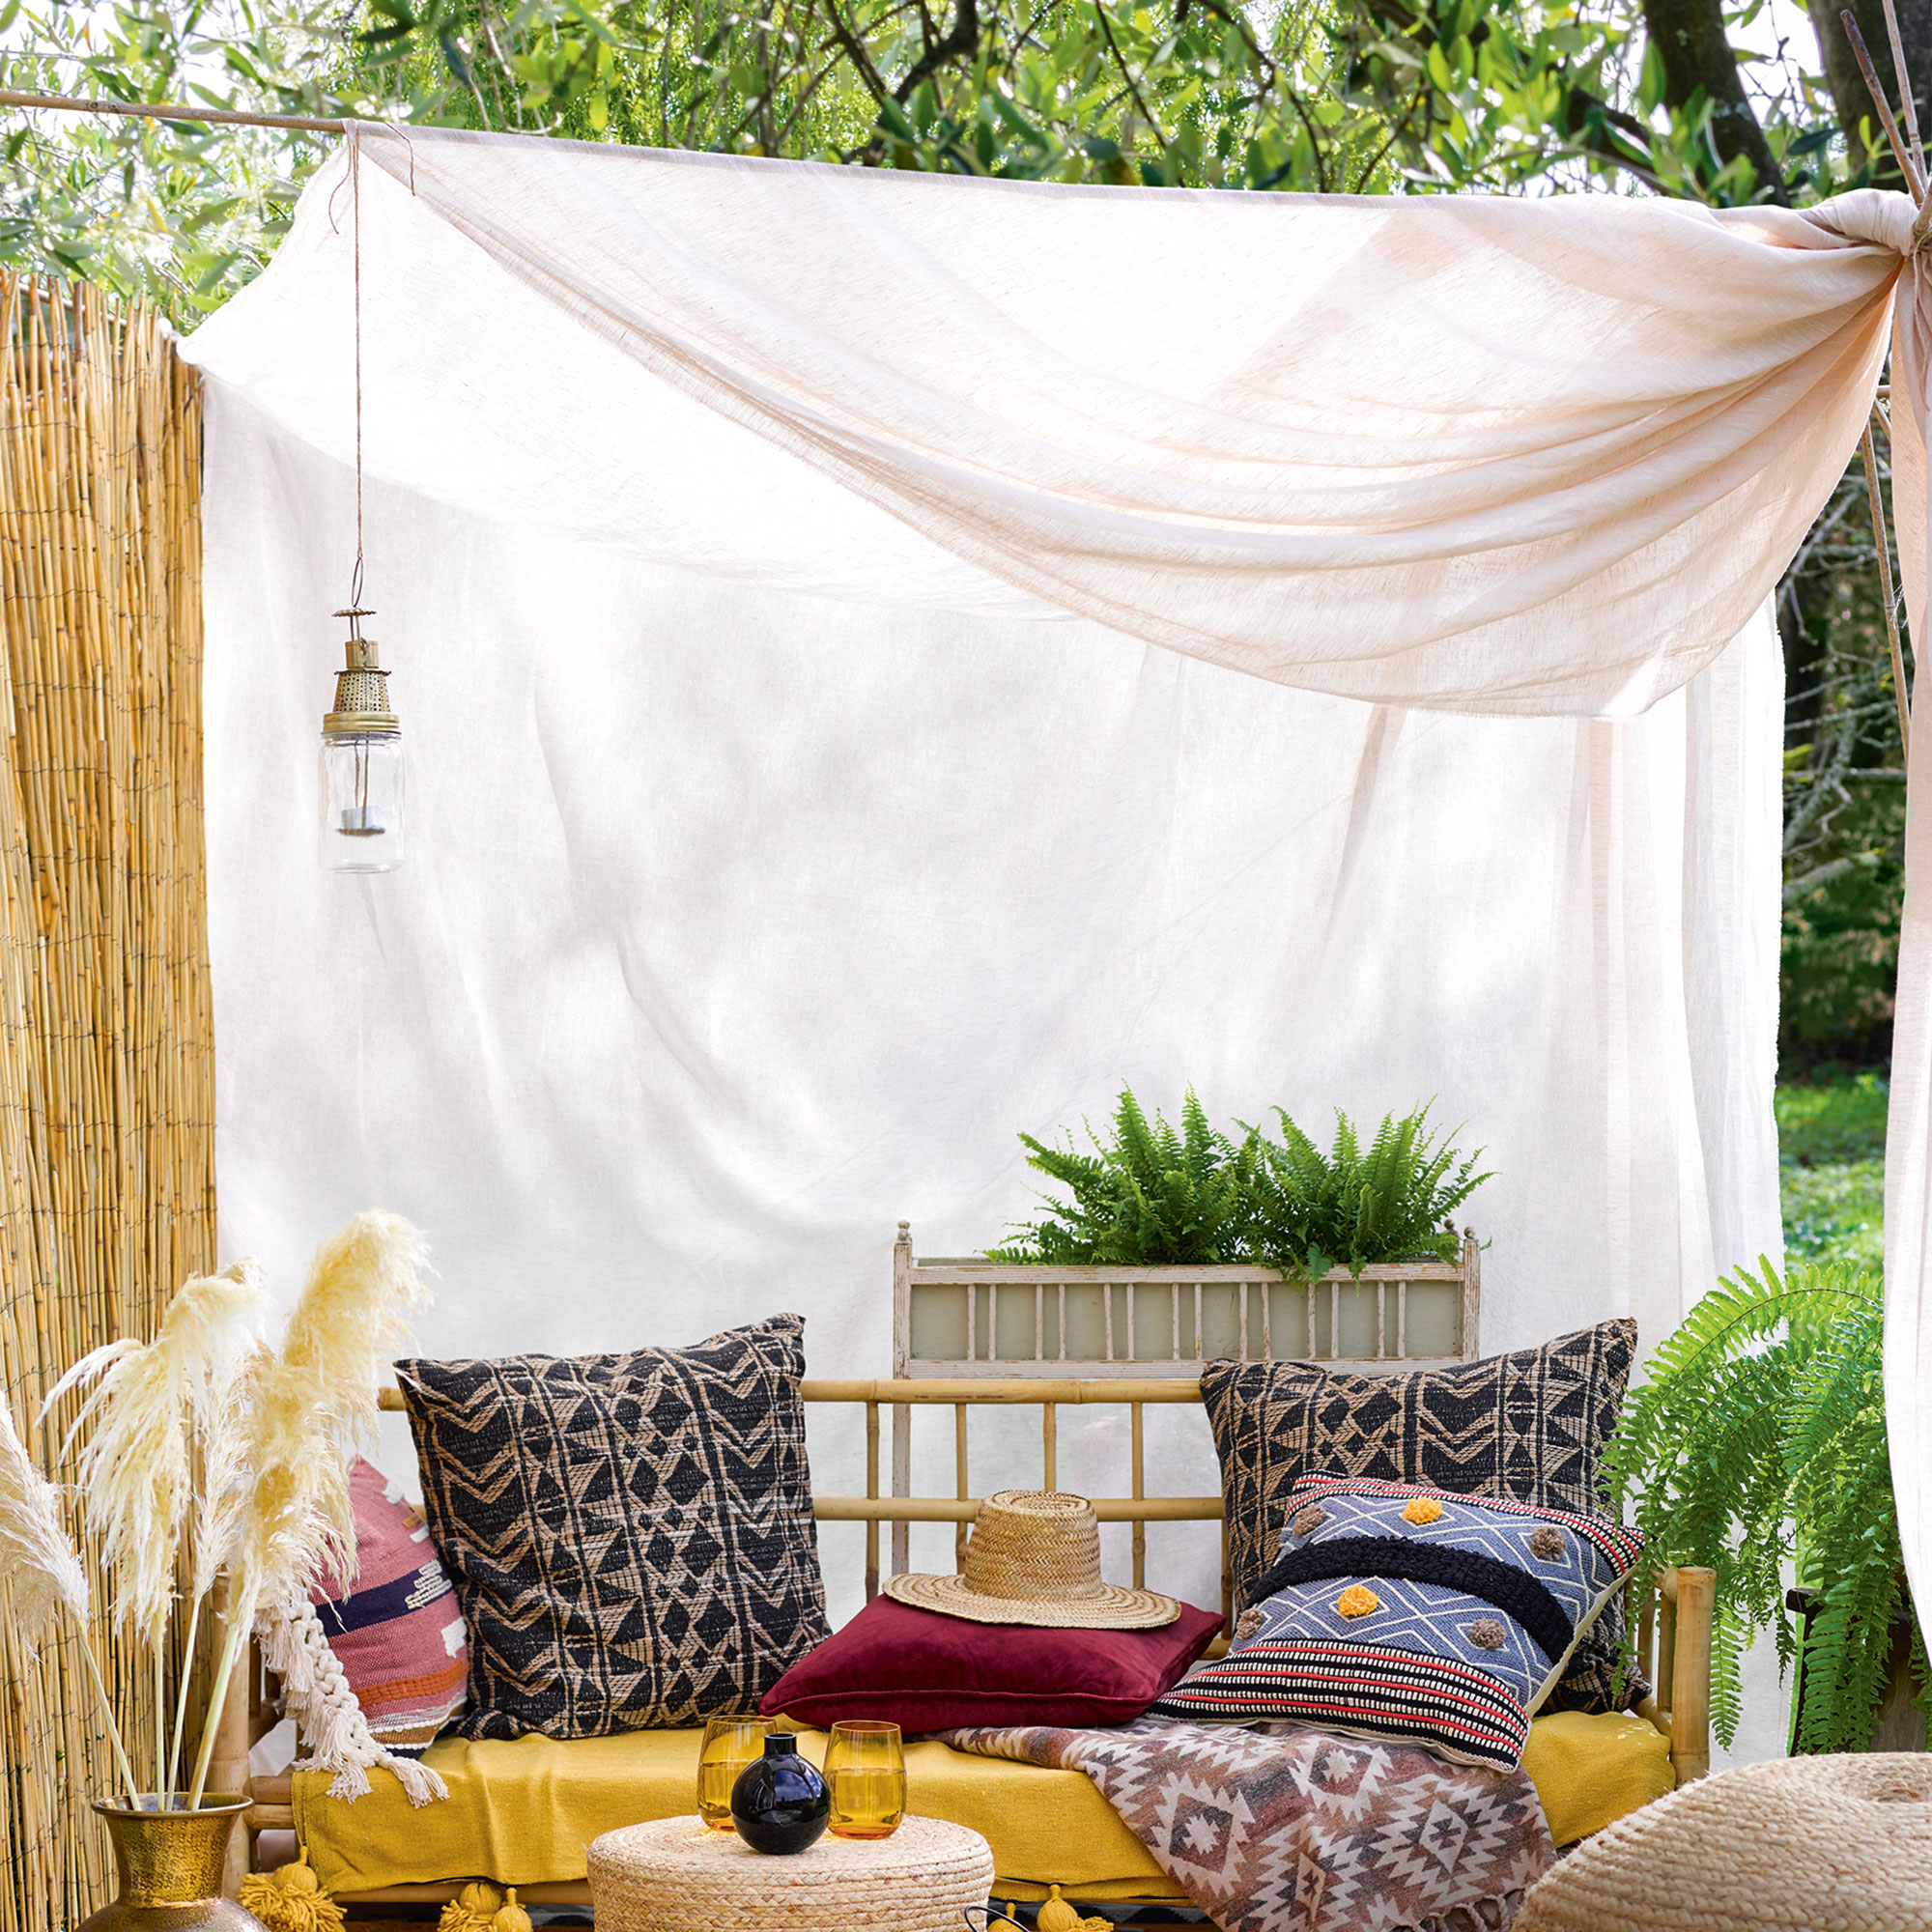 Garden Shade Ideas To Shelter From The Sun In Style | Ideal Home